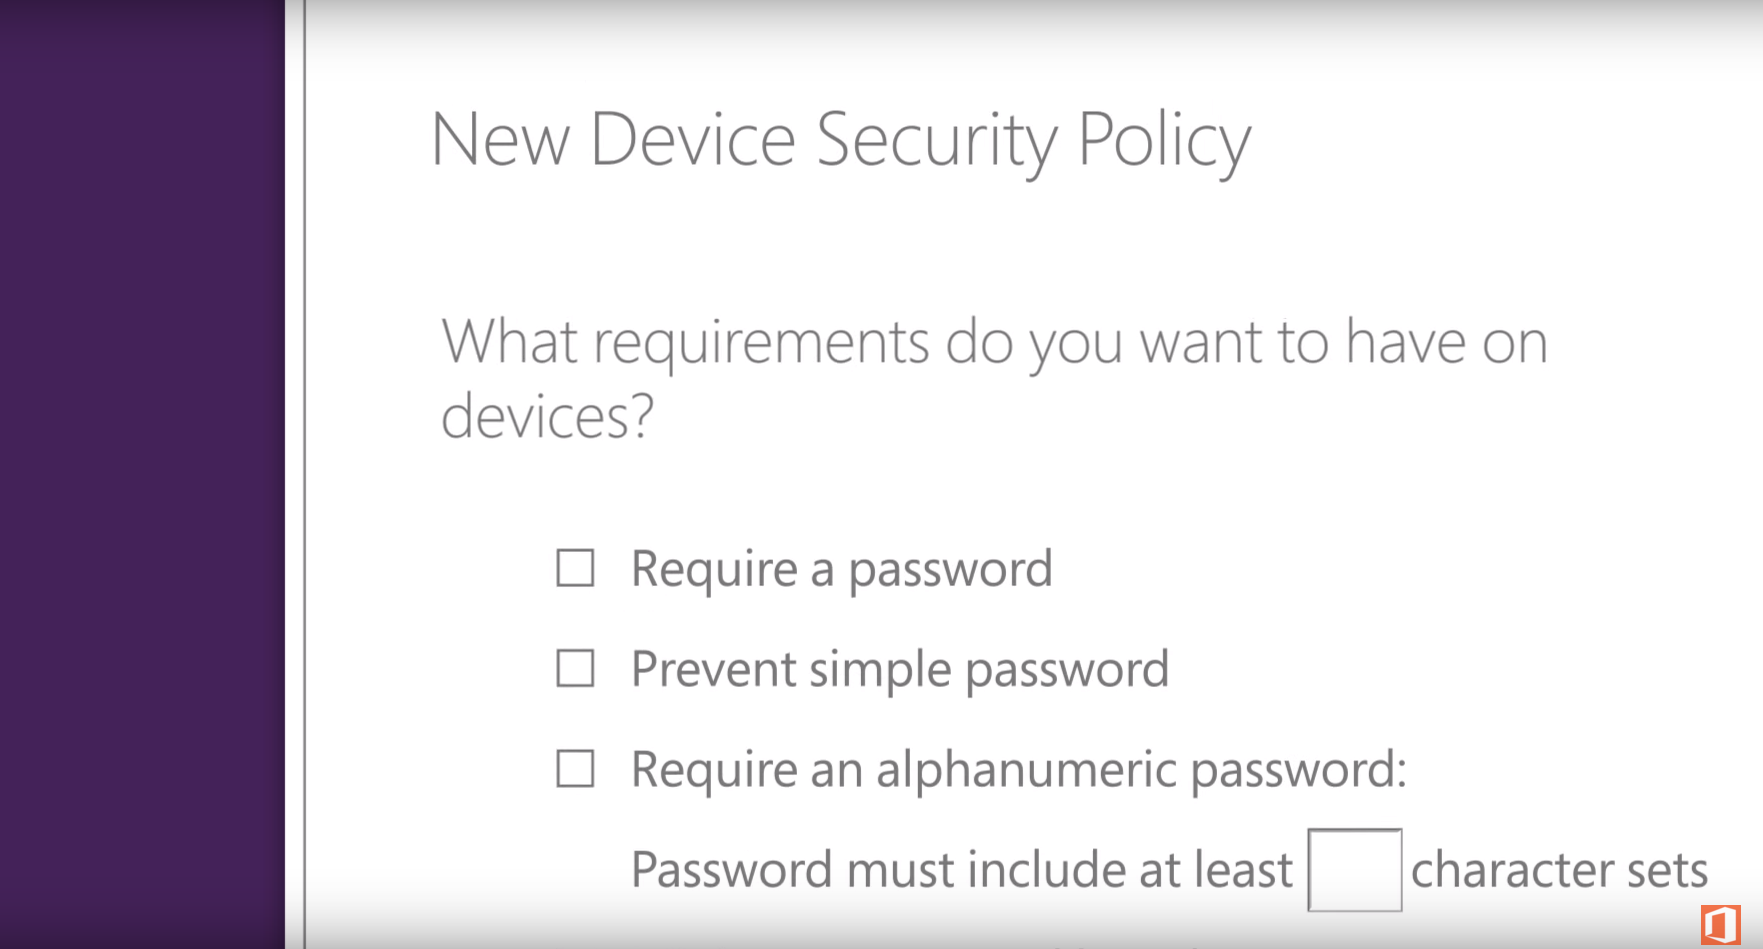 Control password requirements on staff devices